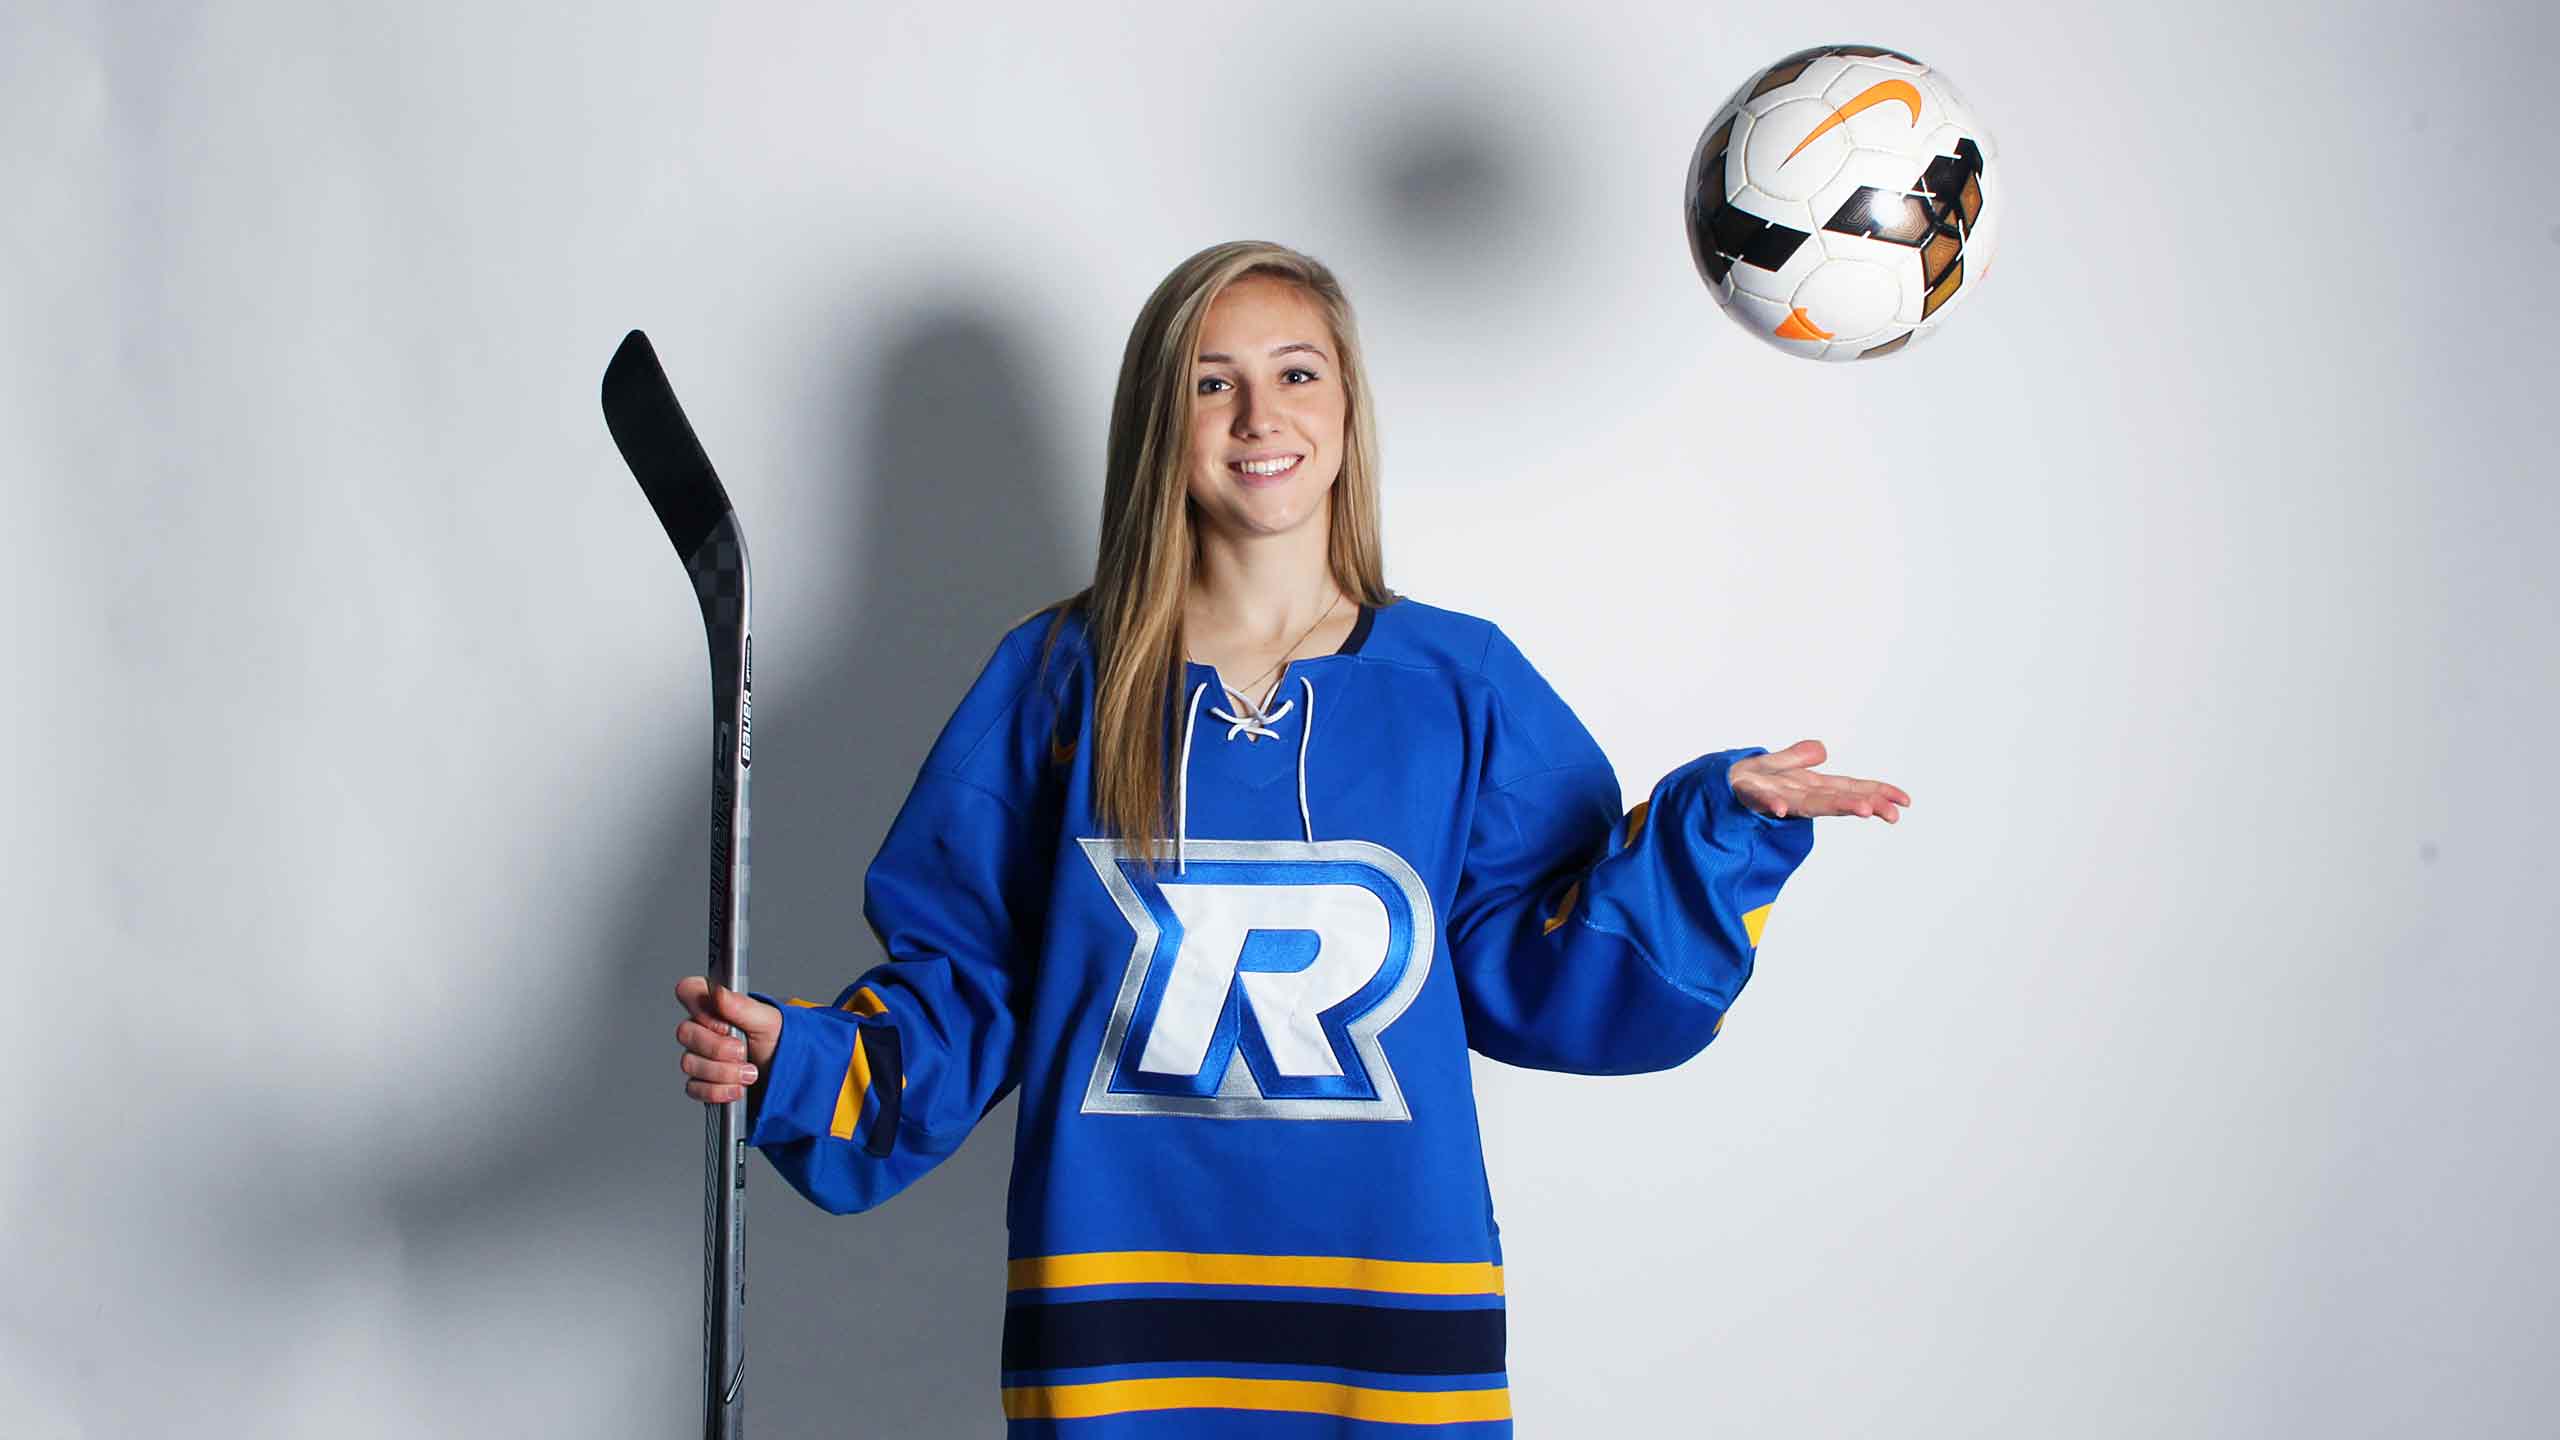 Bethany Clipper is the only athlete to play for two of Ryerson’s U Sports teams this season. PHOTO: IZABELLA BALCERZAK